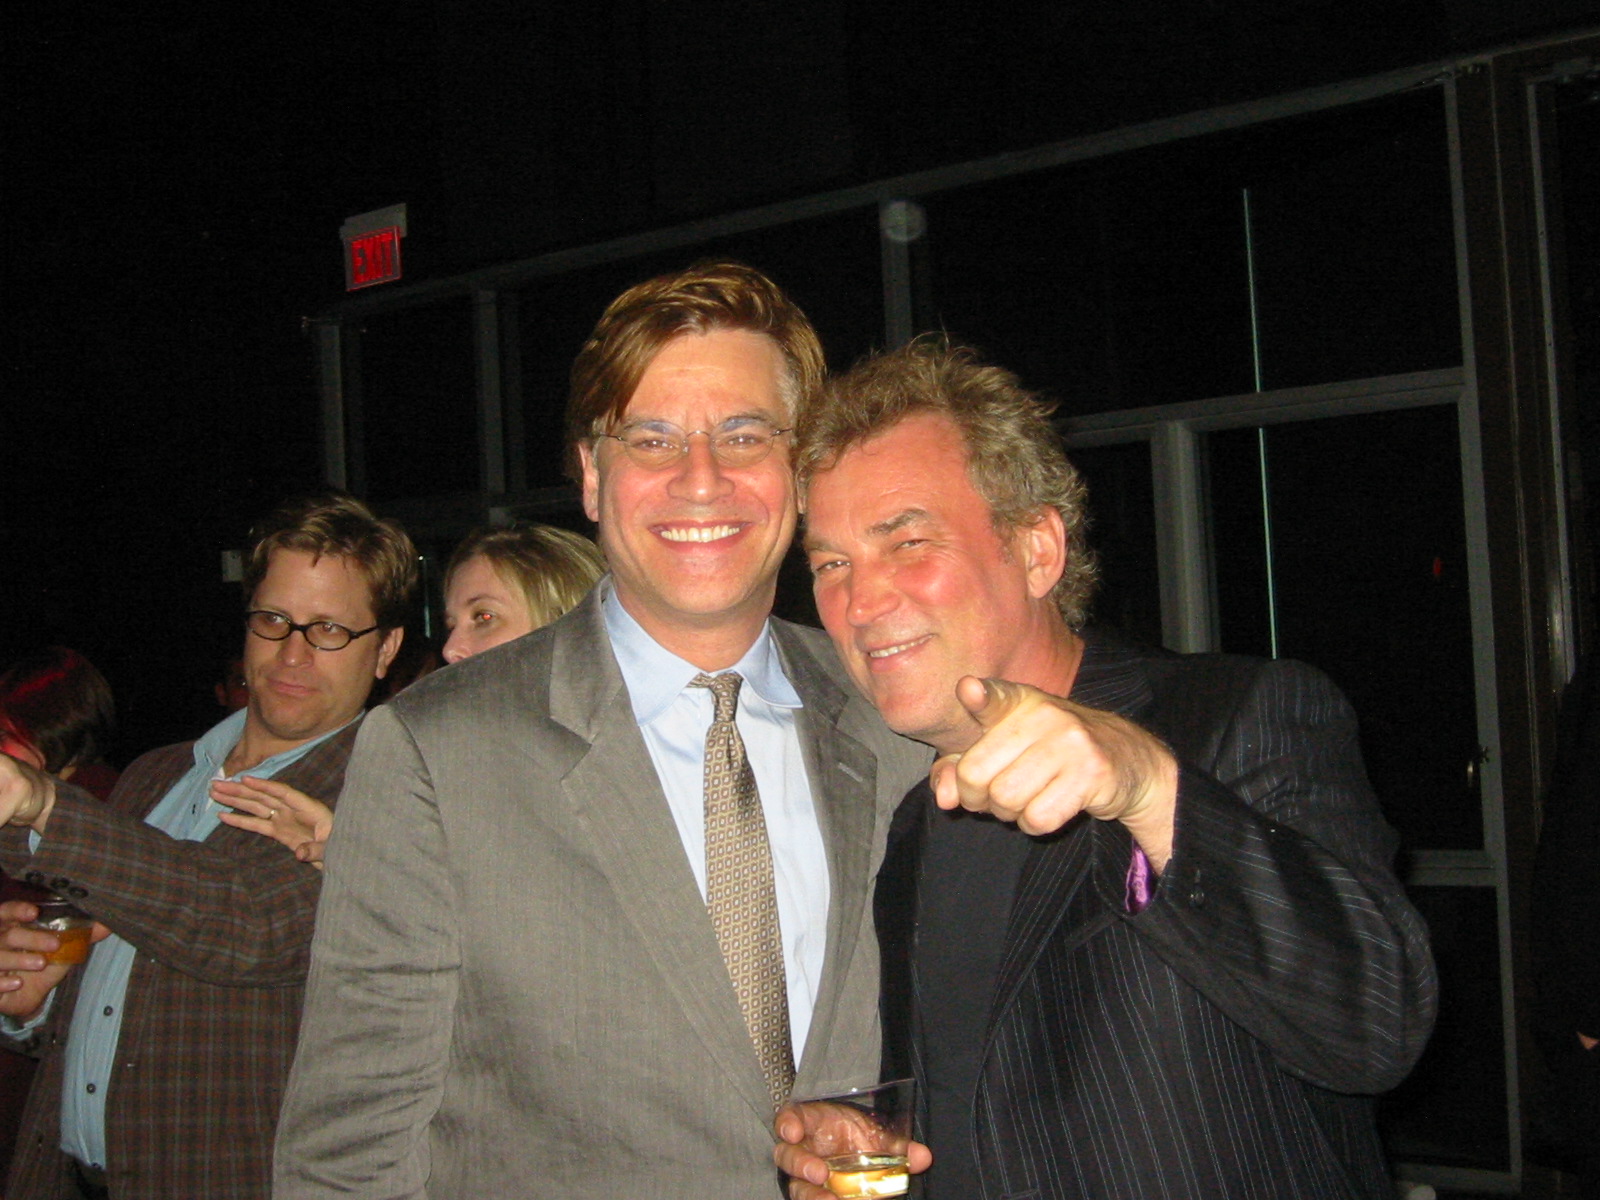 Aaron Sorkin, Playwright & Des MacAnuff, Director - The Farnsworth Invention, Premiere